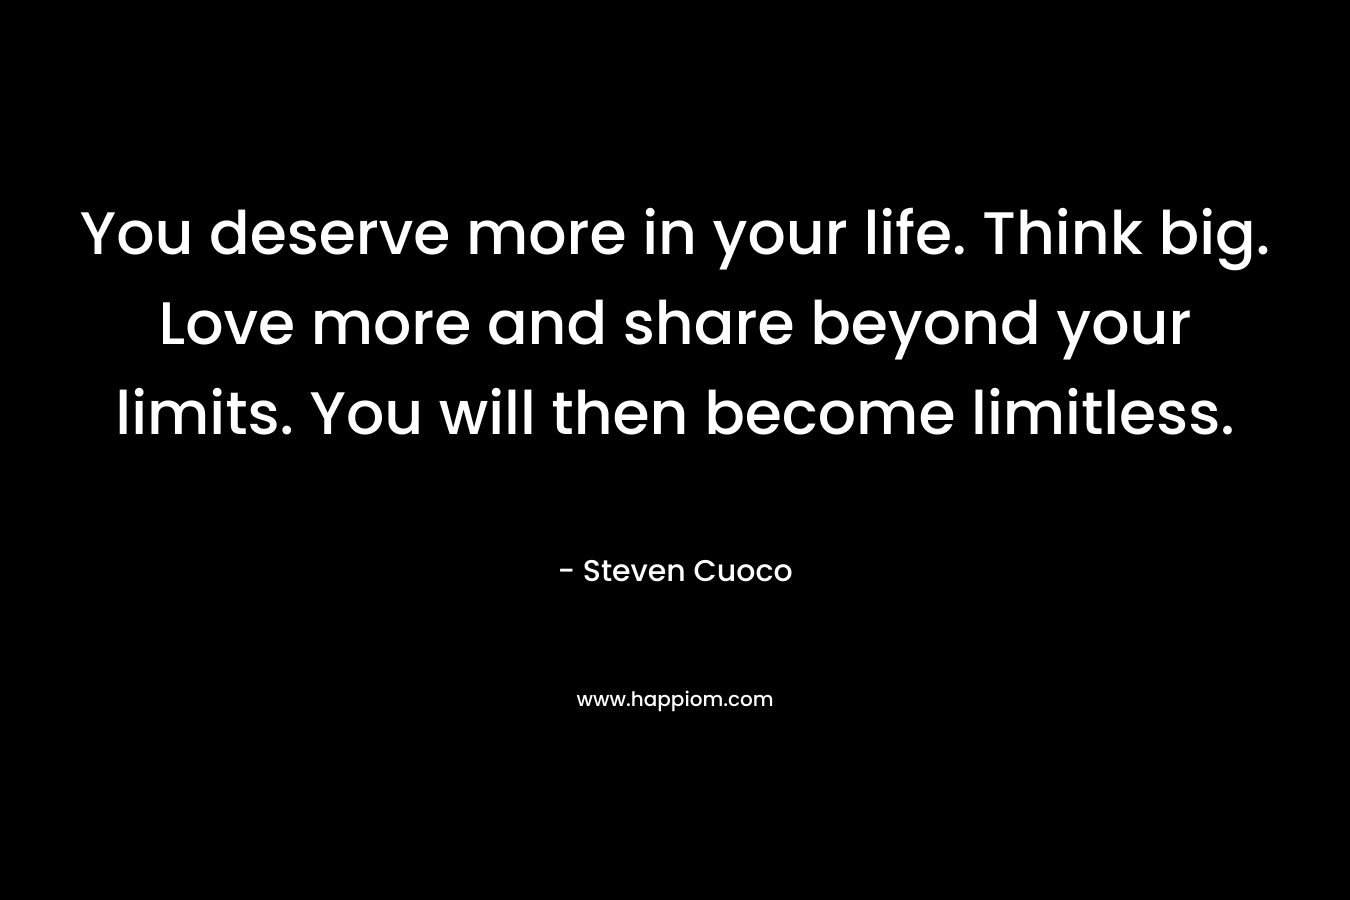 You deserve more in your life. Think big. Love more and share beyond your limits. You will then become limitless. – Steven Cuoco